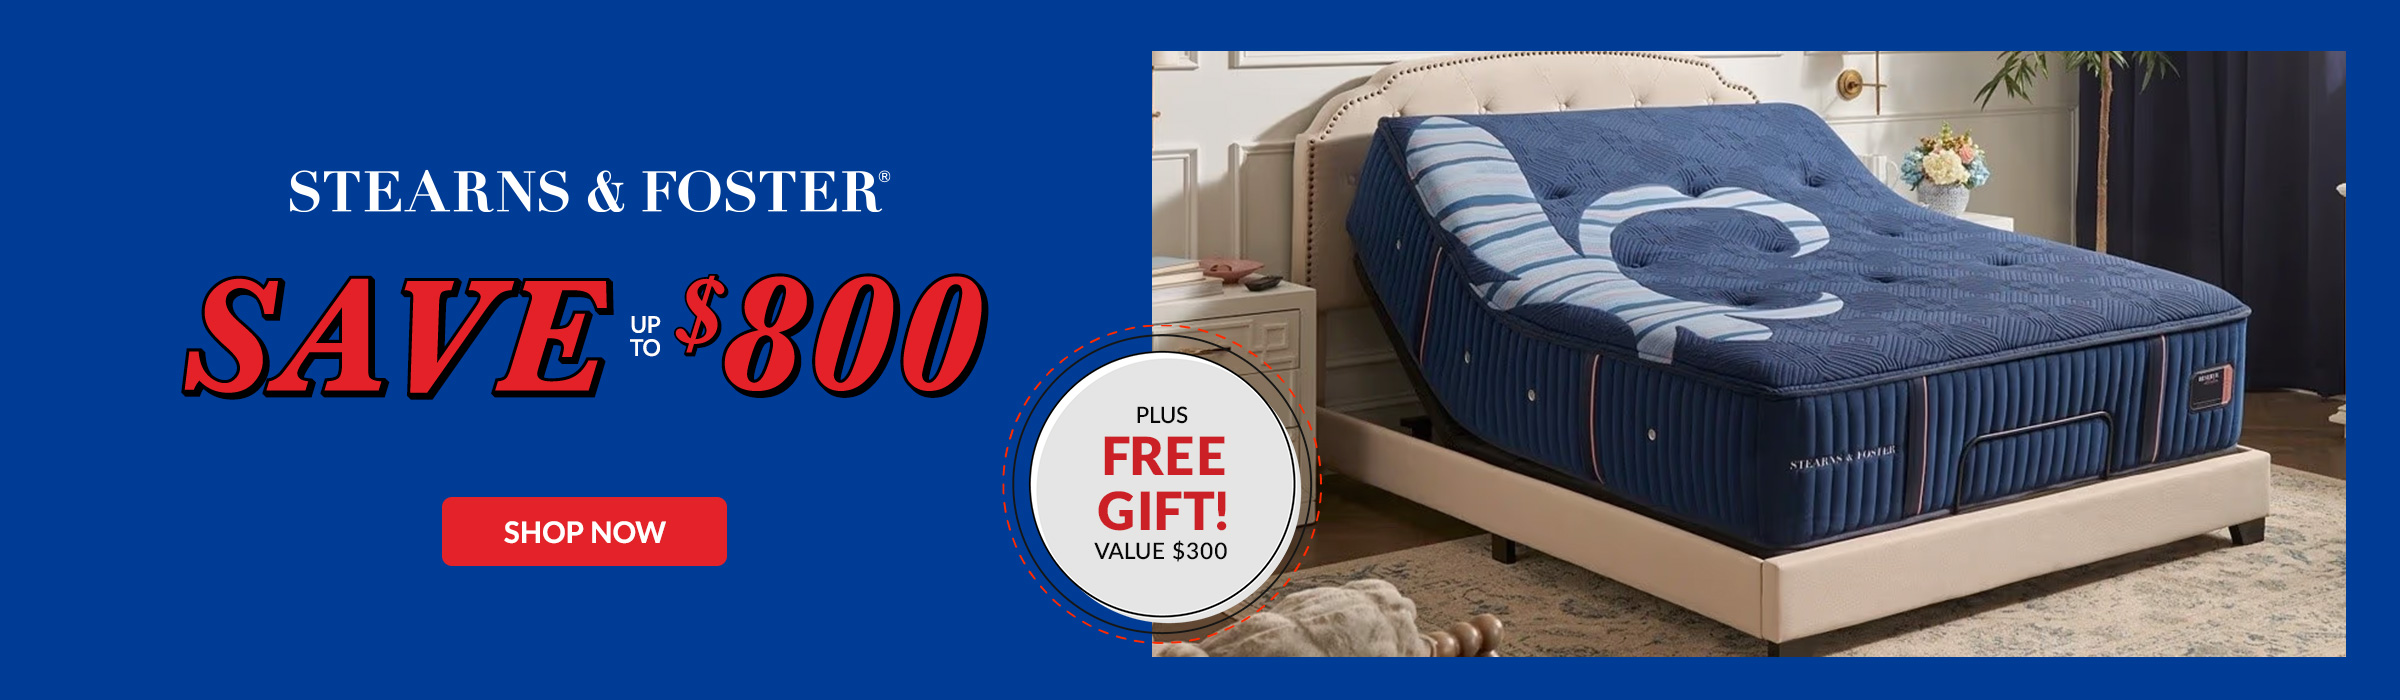 Save up to $800 on Stearns and Foster